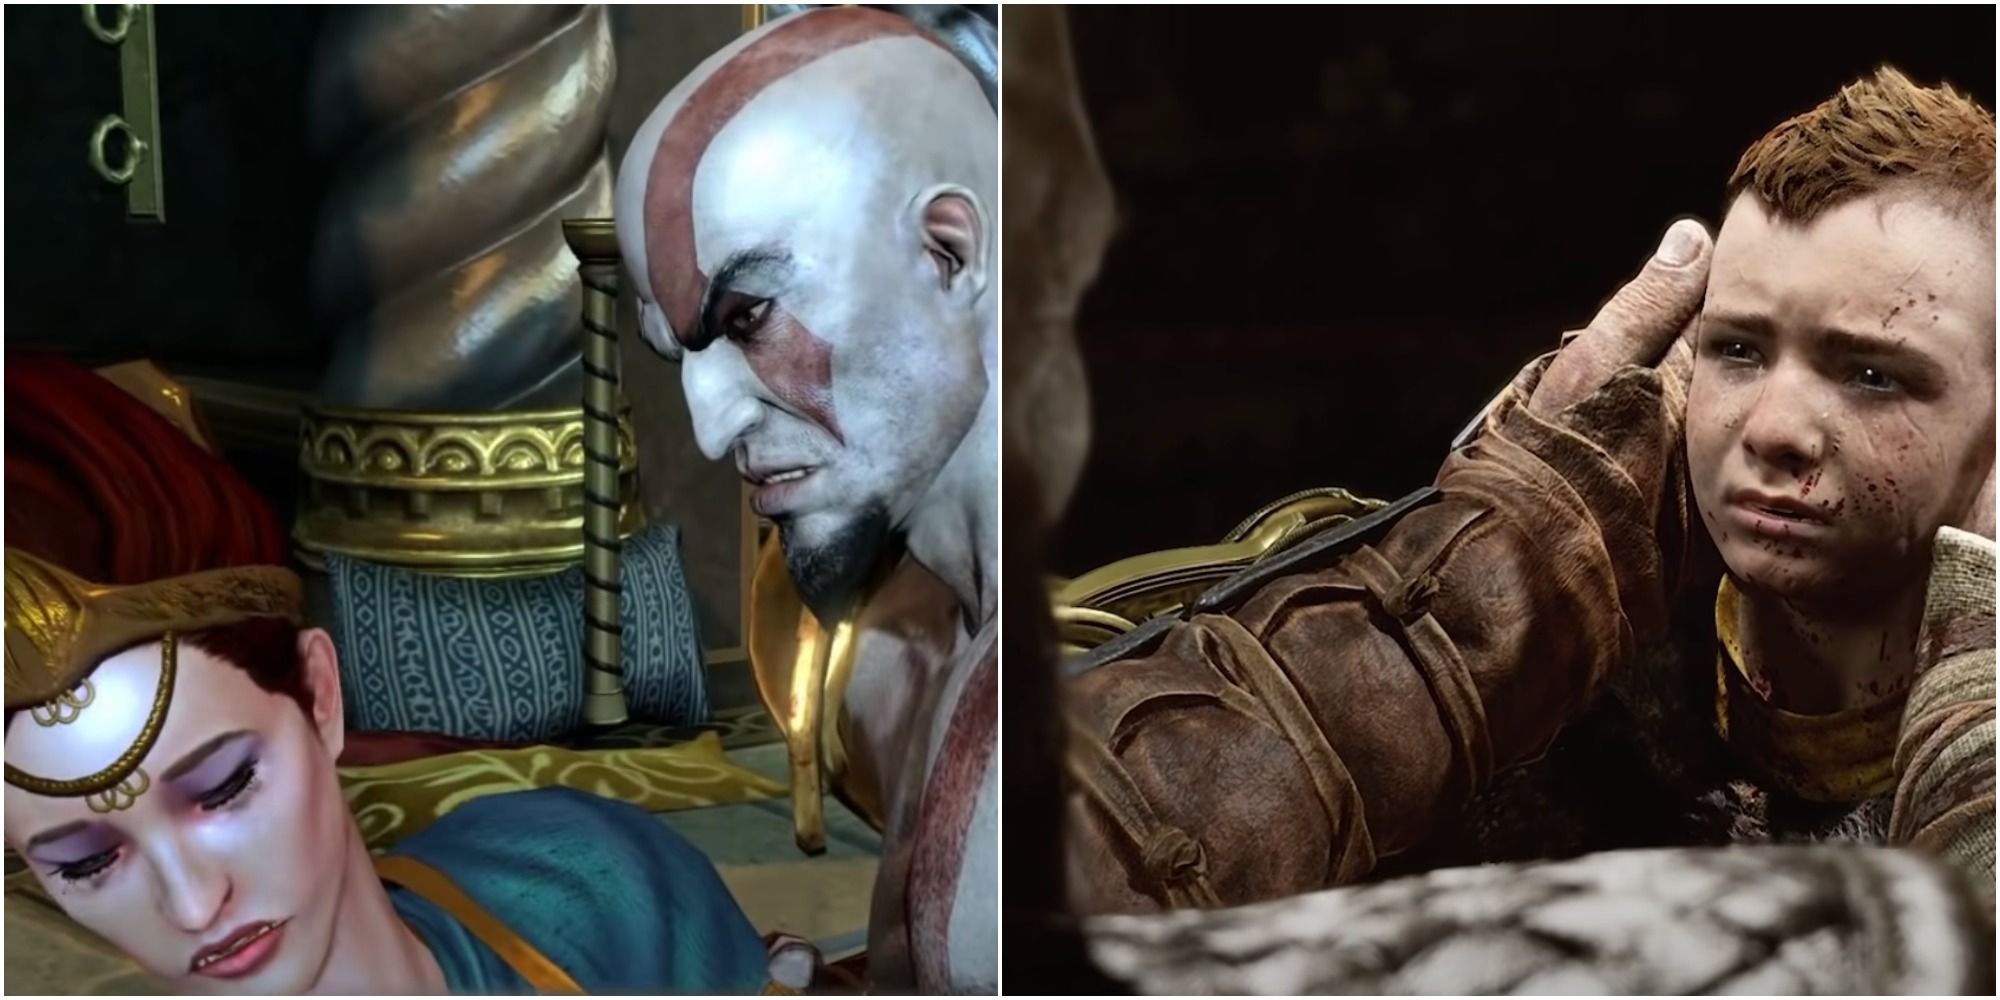 God of War Kratos's notion of violence has changed